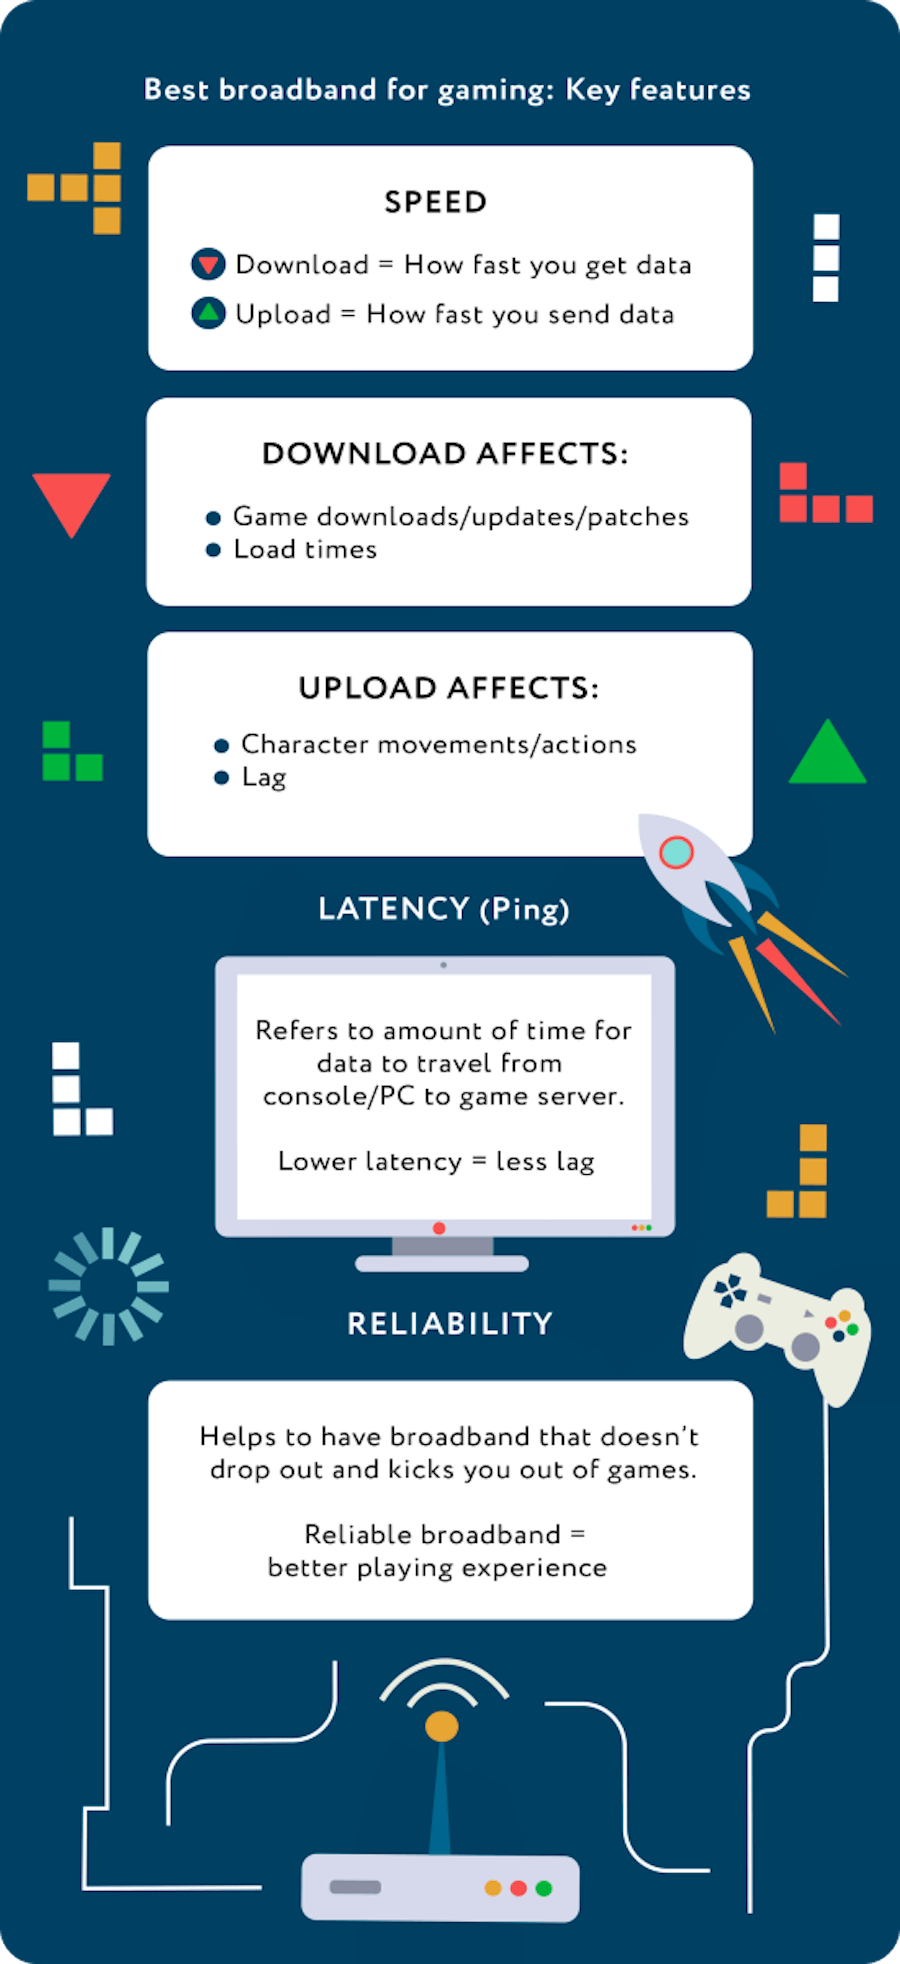 Best broadband for gaming: Key features infographic